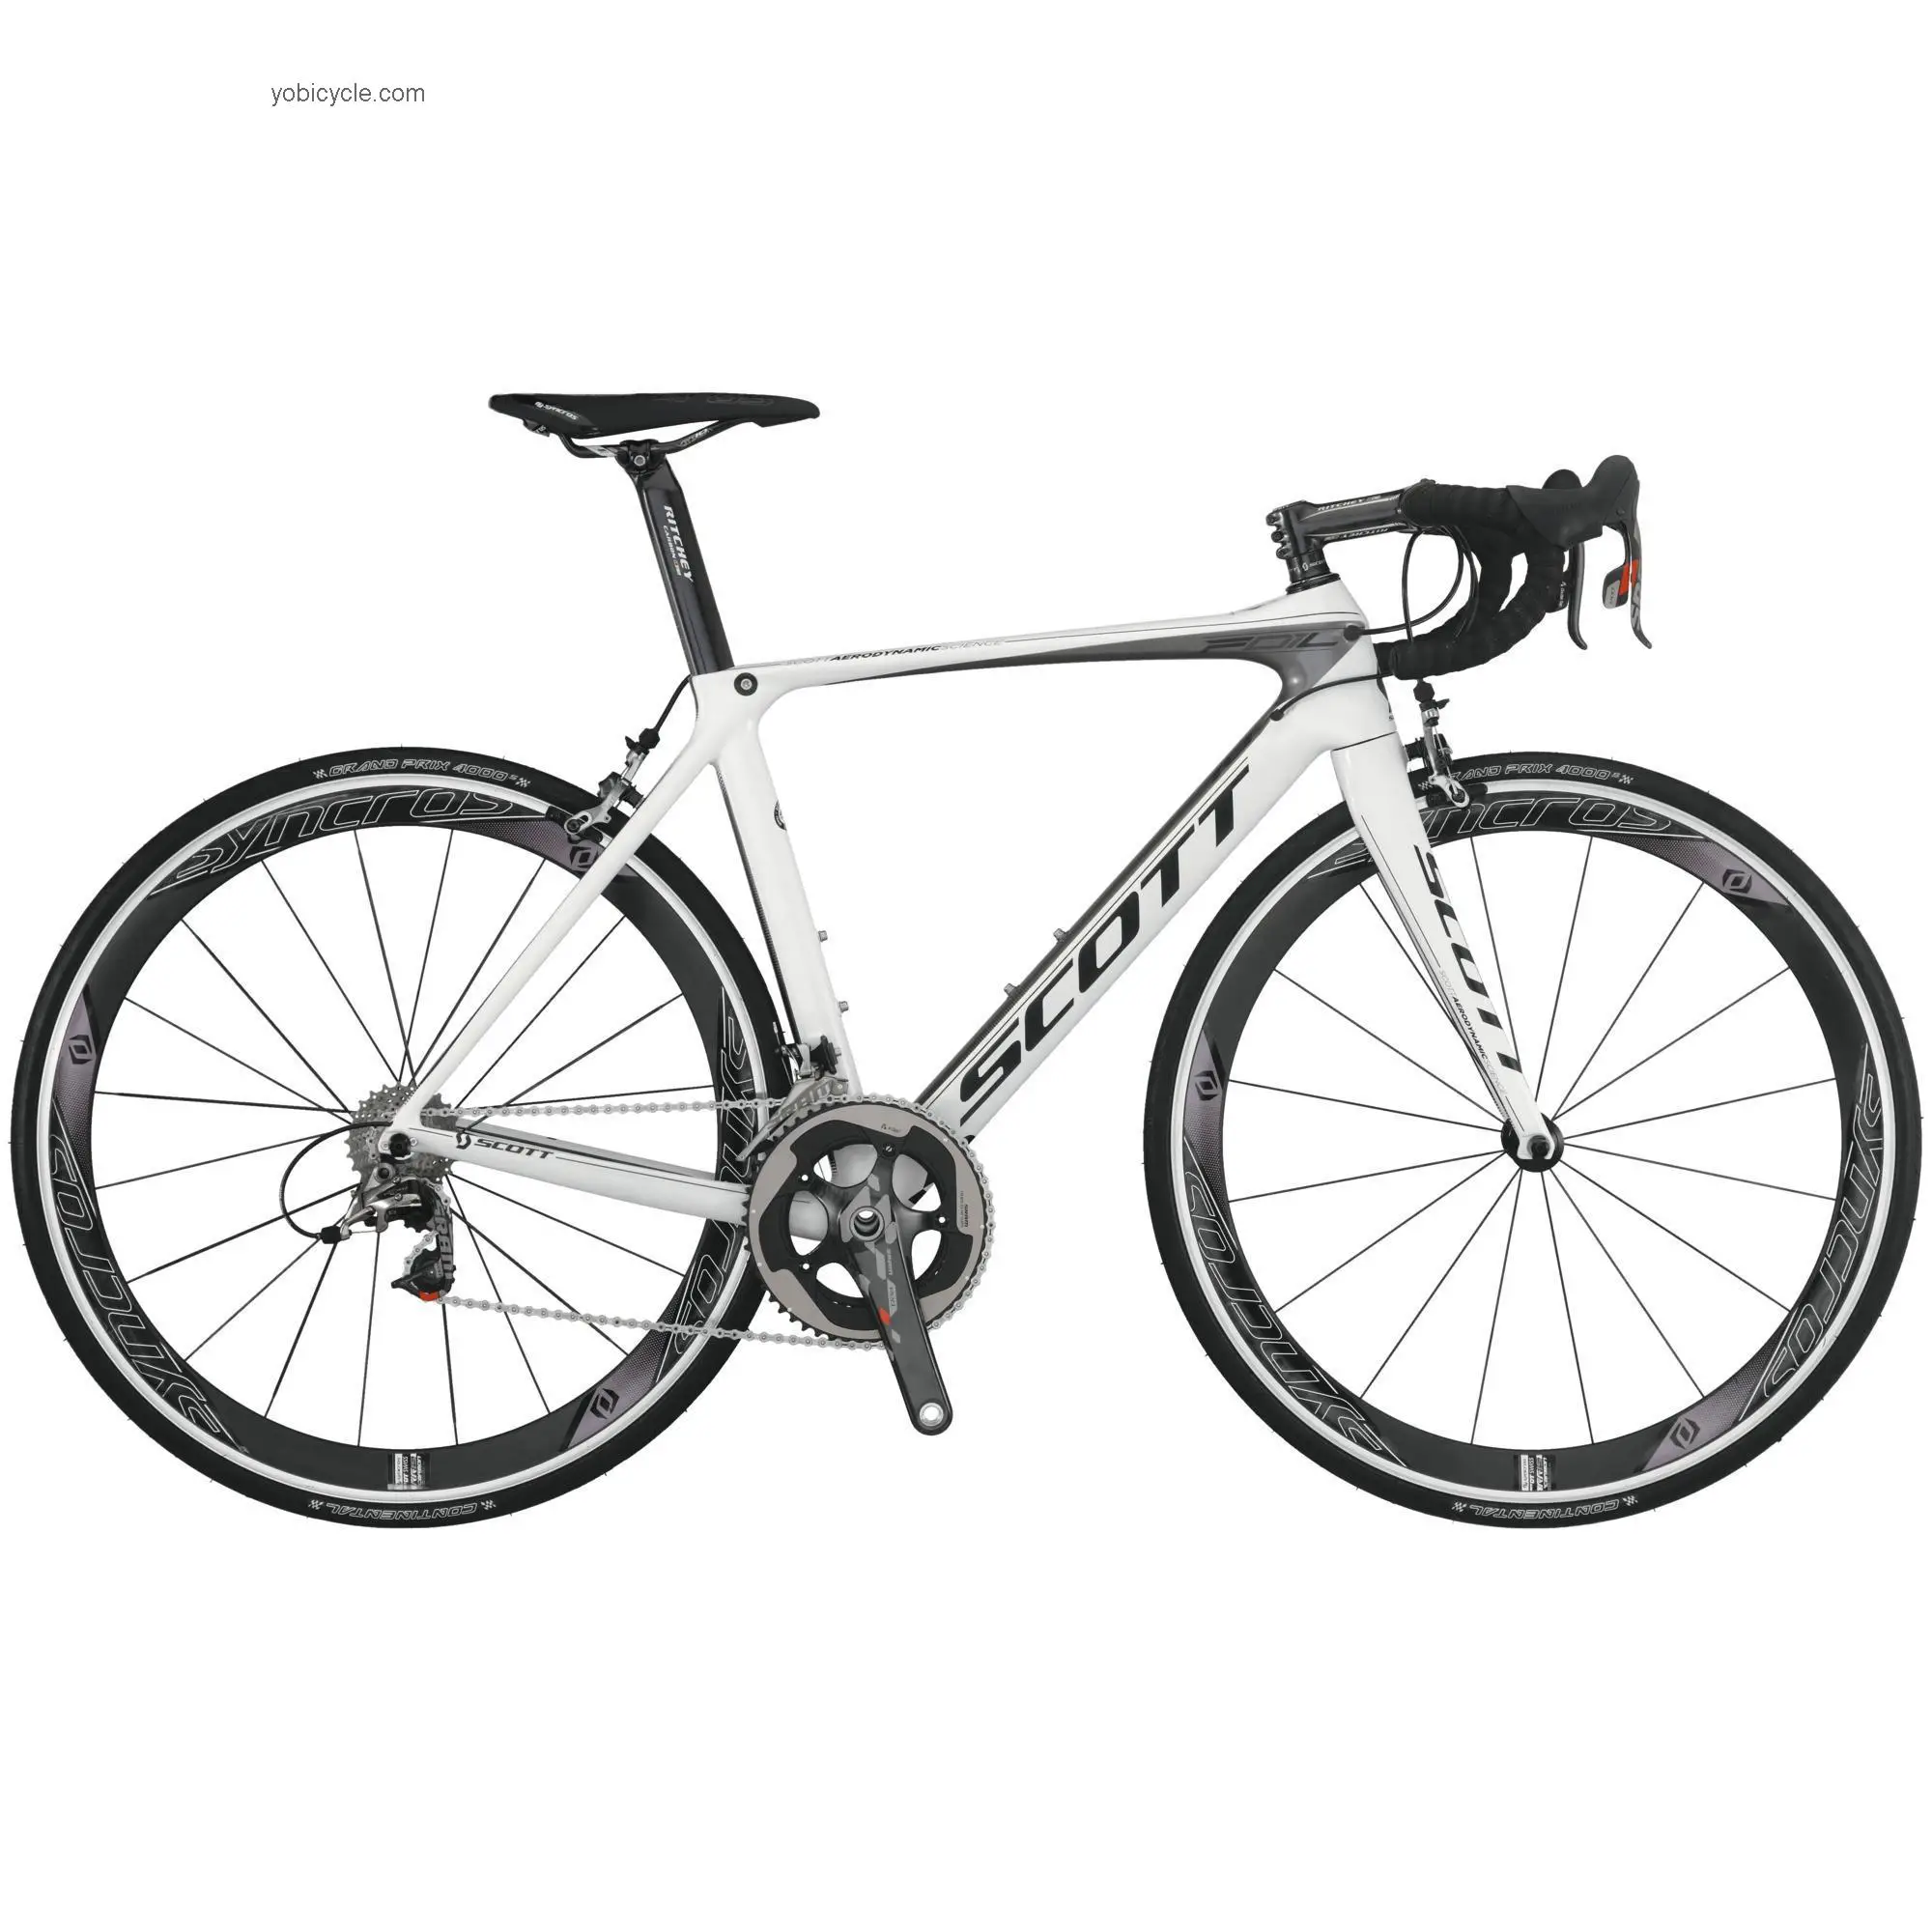 Scott  Foil 10 Technical data and specifications